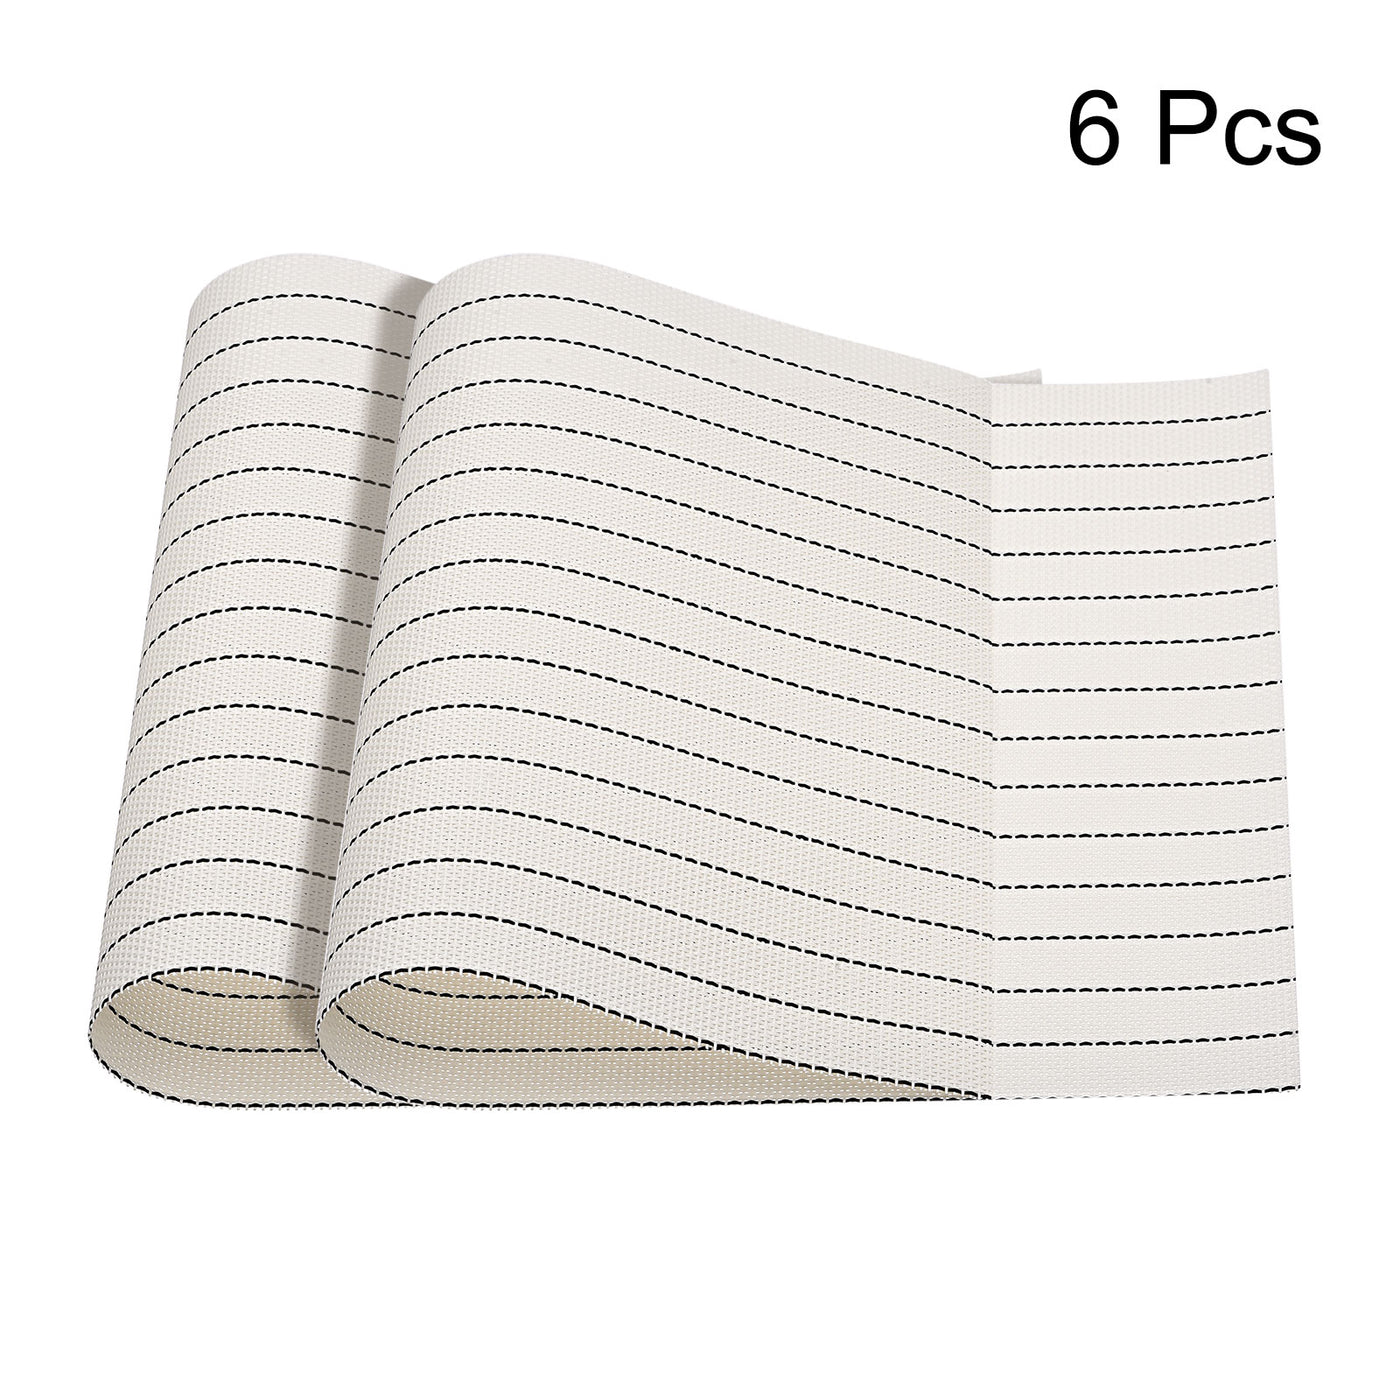 uxcell Uxcell Place Mats, 450x300mm Table Mats Set of 6 PVC Washable Woven Placemat White